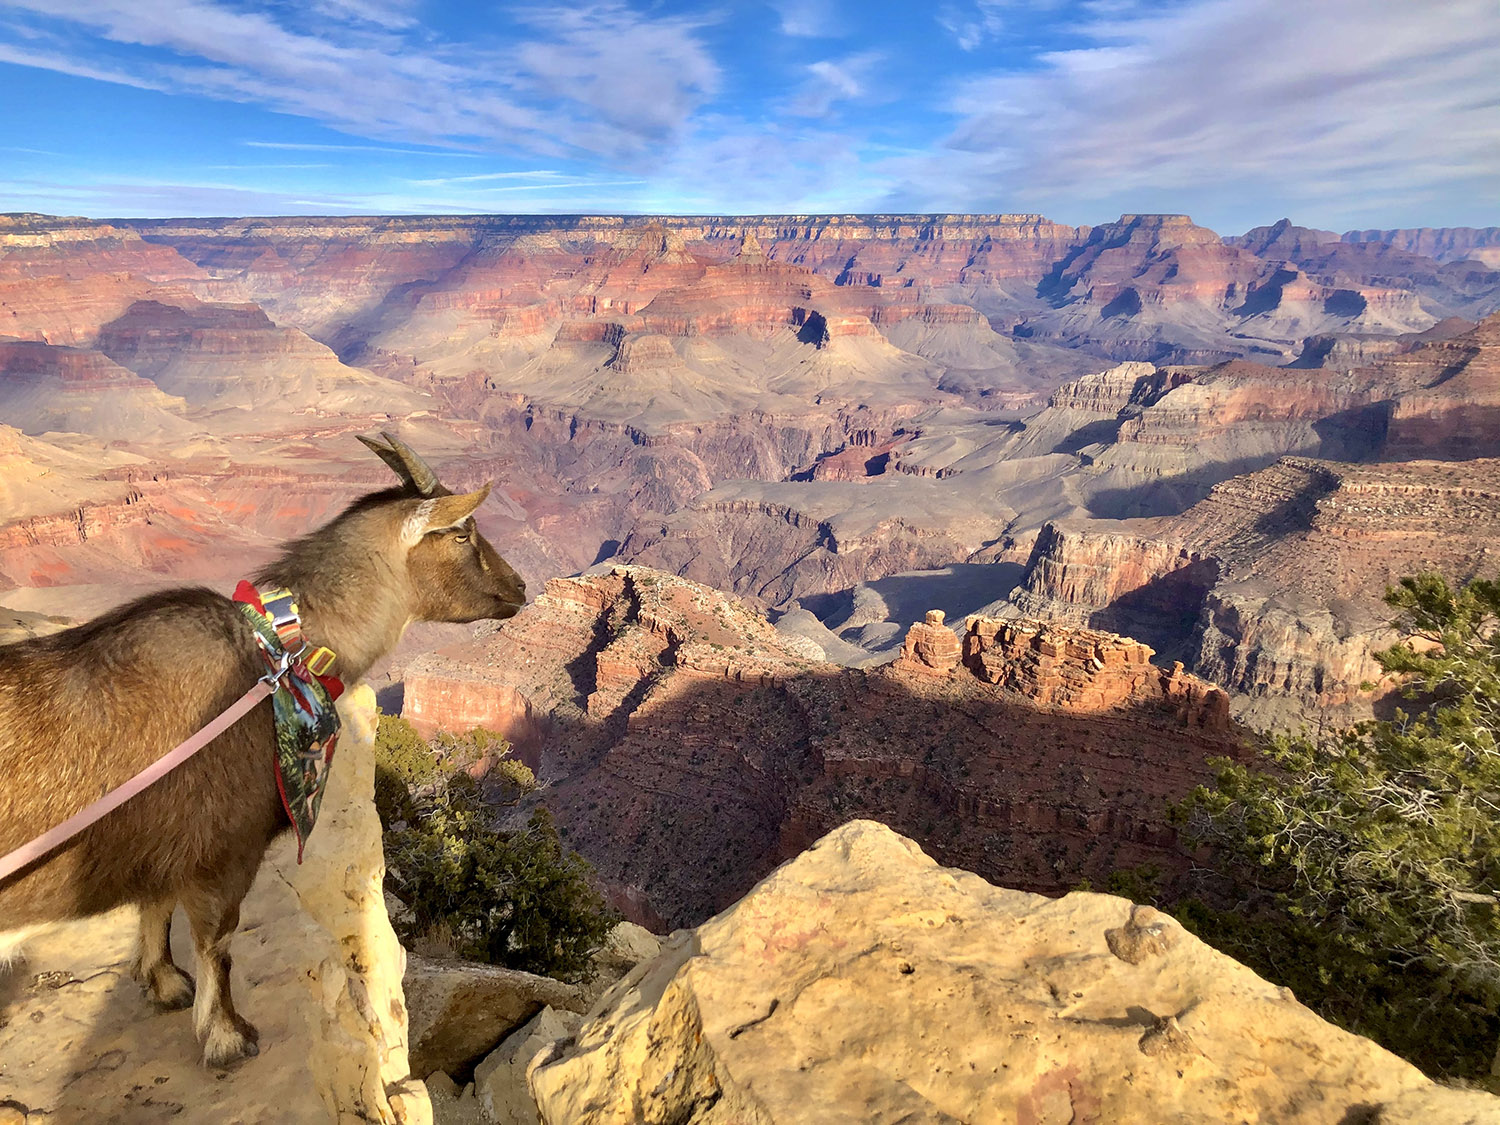 A goat oversees a vast canyon punctuated by buttes and mesas.